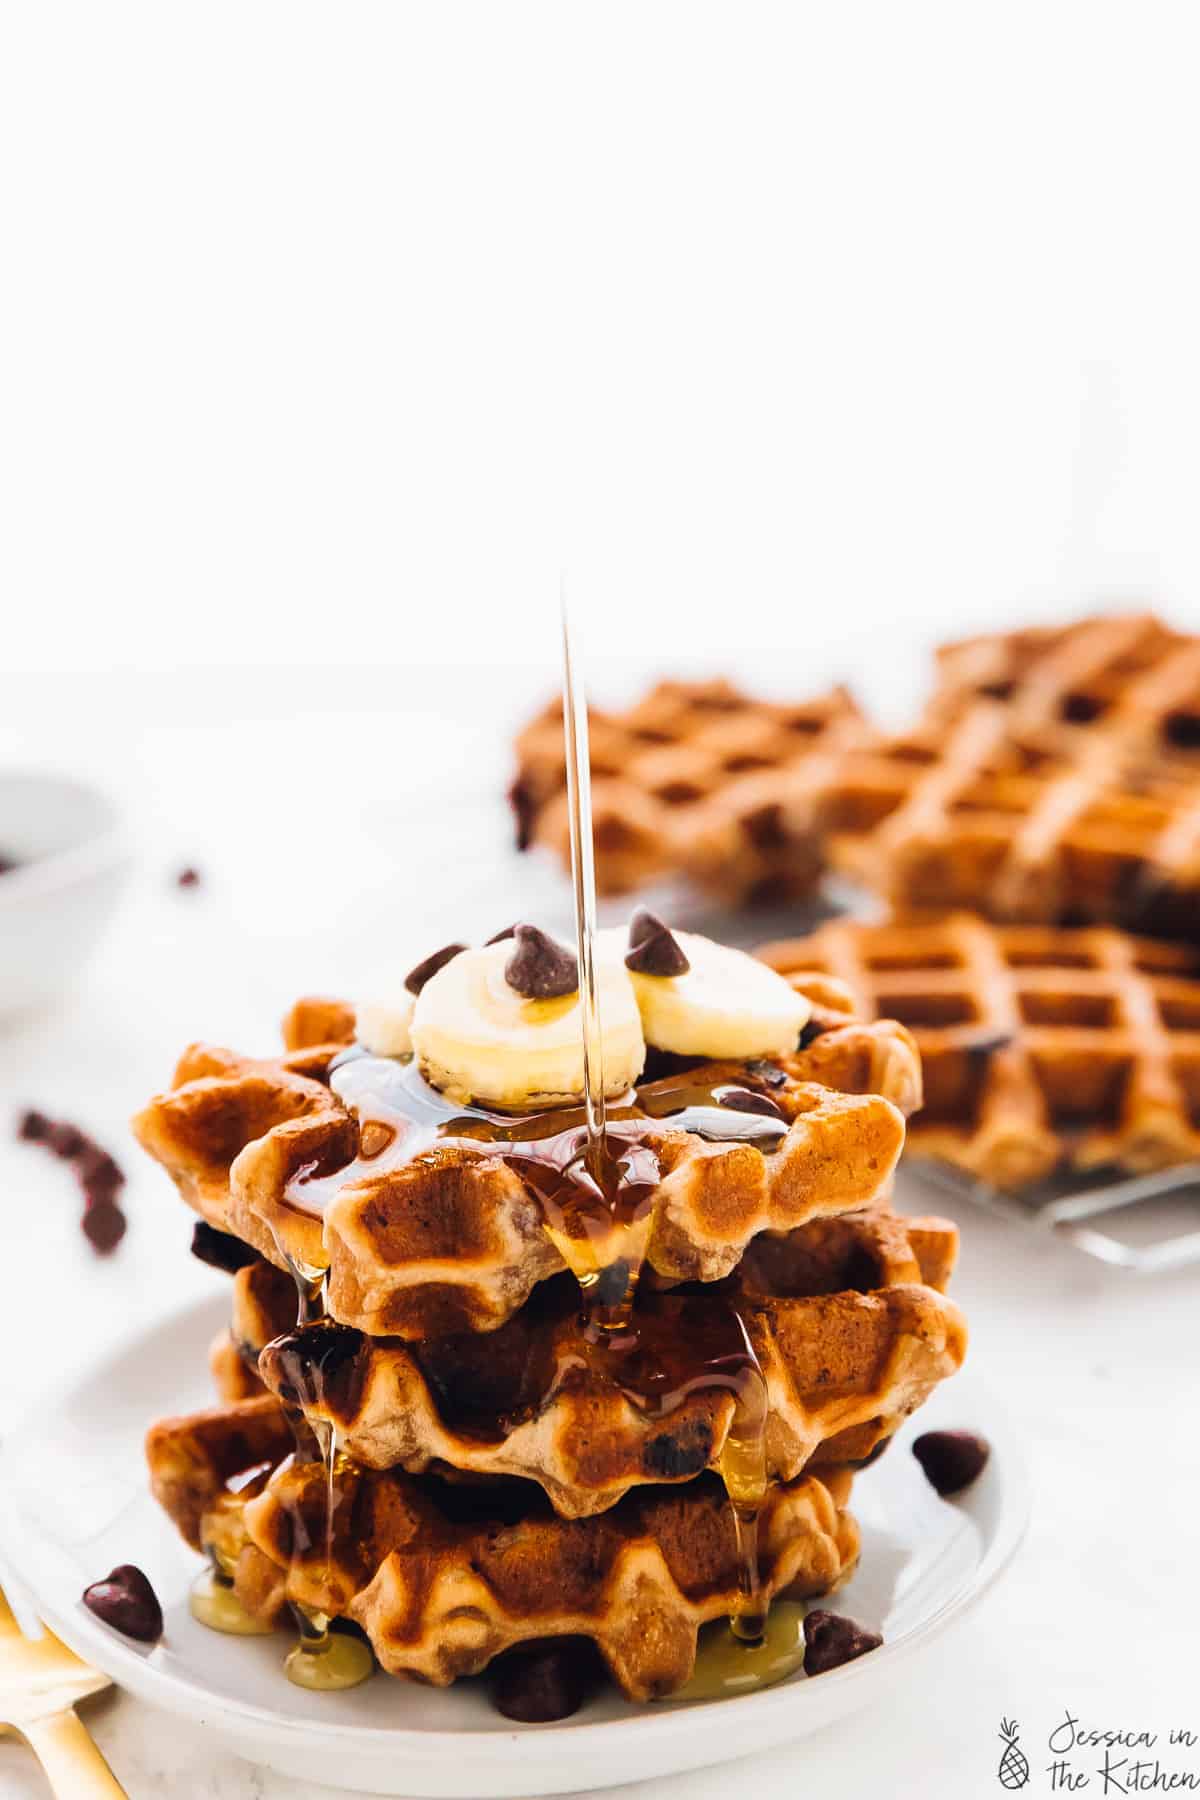 Banana Bread Waffles (with Chocolate Chips - Gluten Free)